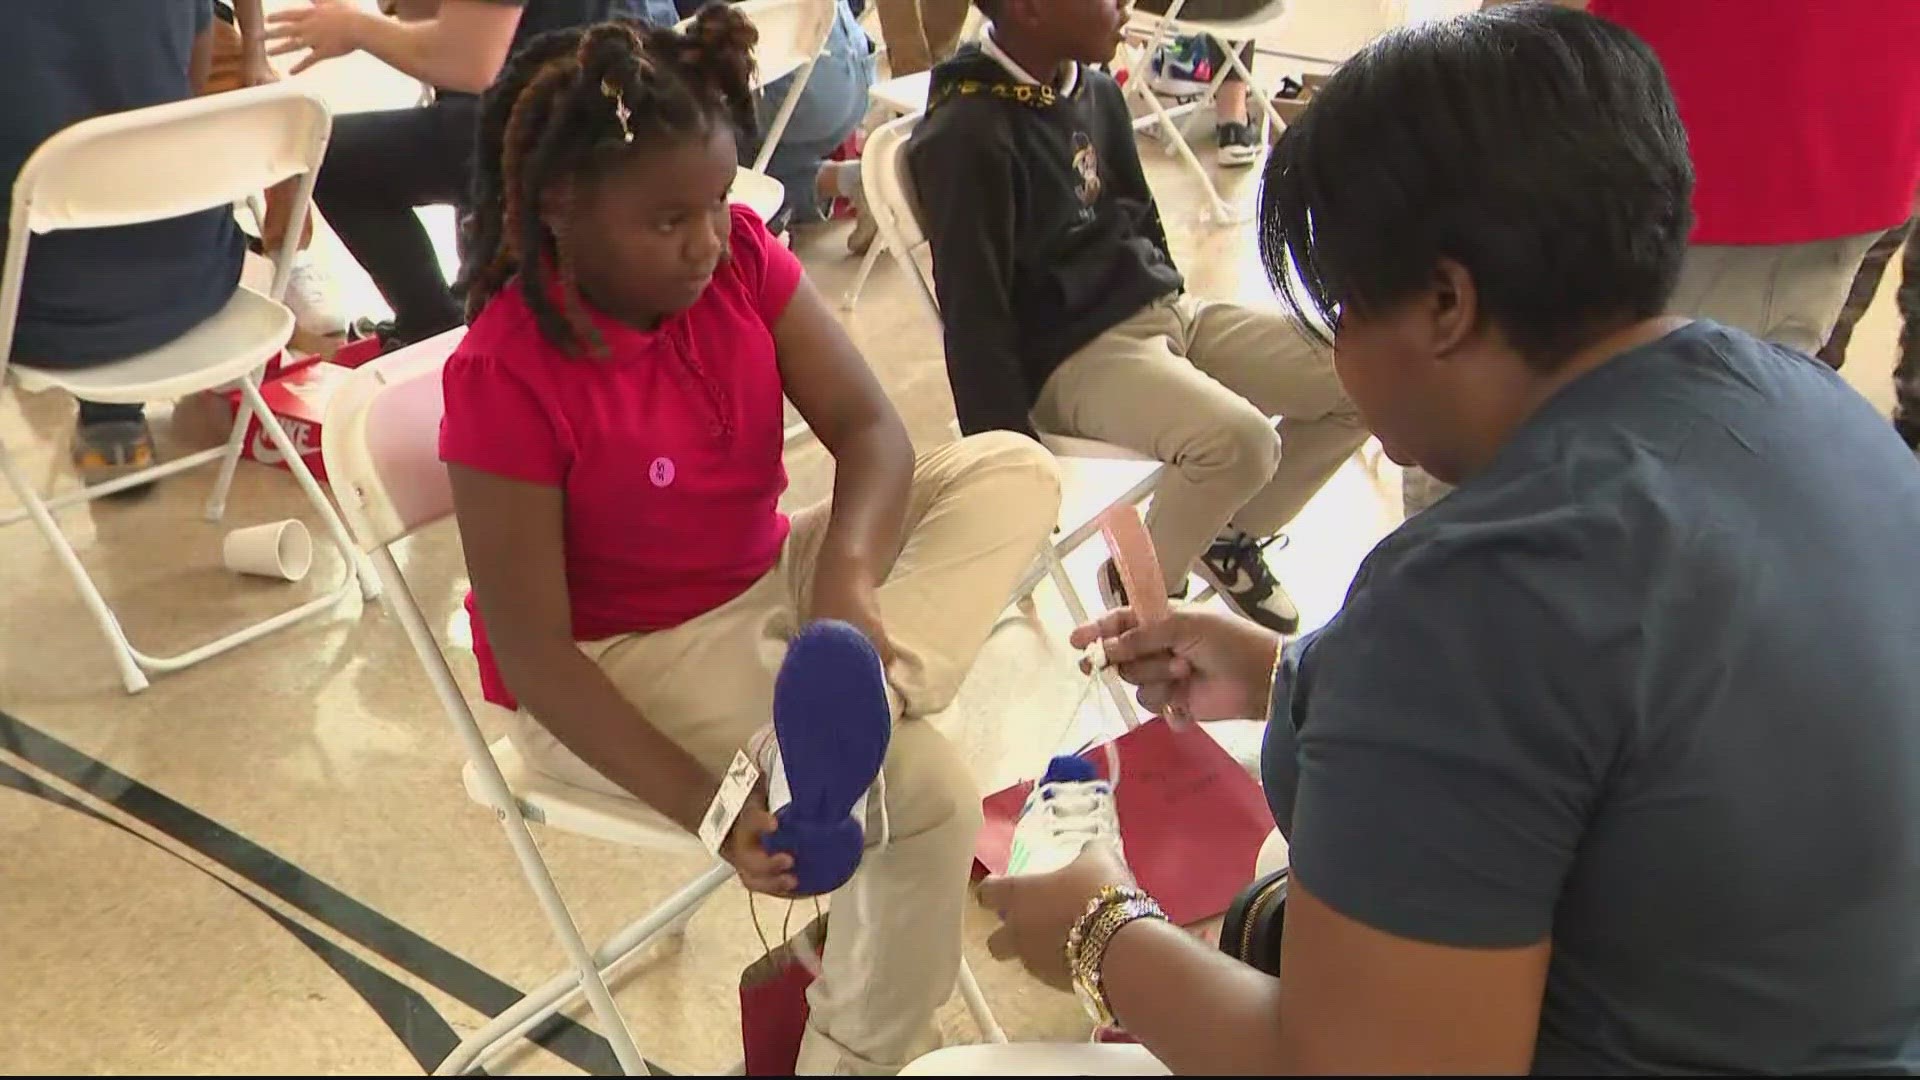 OVER 300 KIDS IN THE DISTRICT WERE SIZED, AND WALKED OUT THE DOOR WEARING A NEW PAIR OF SHOES.